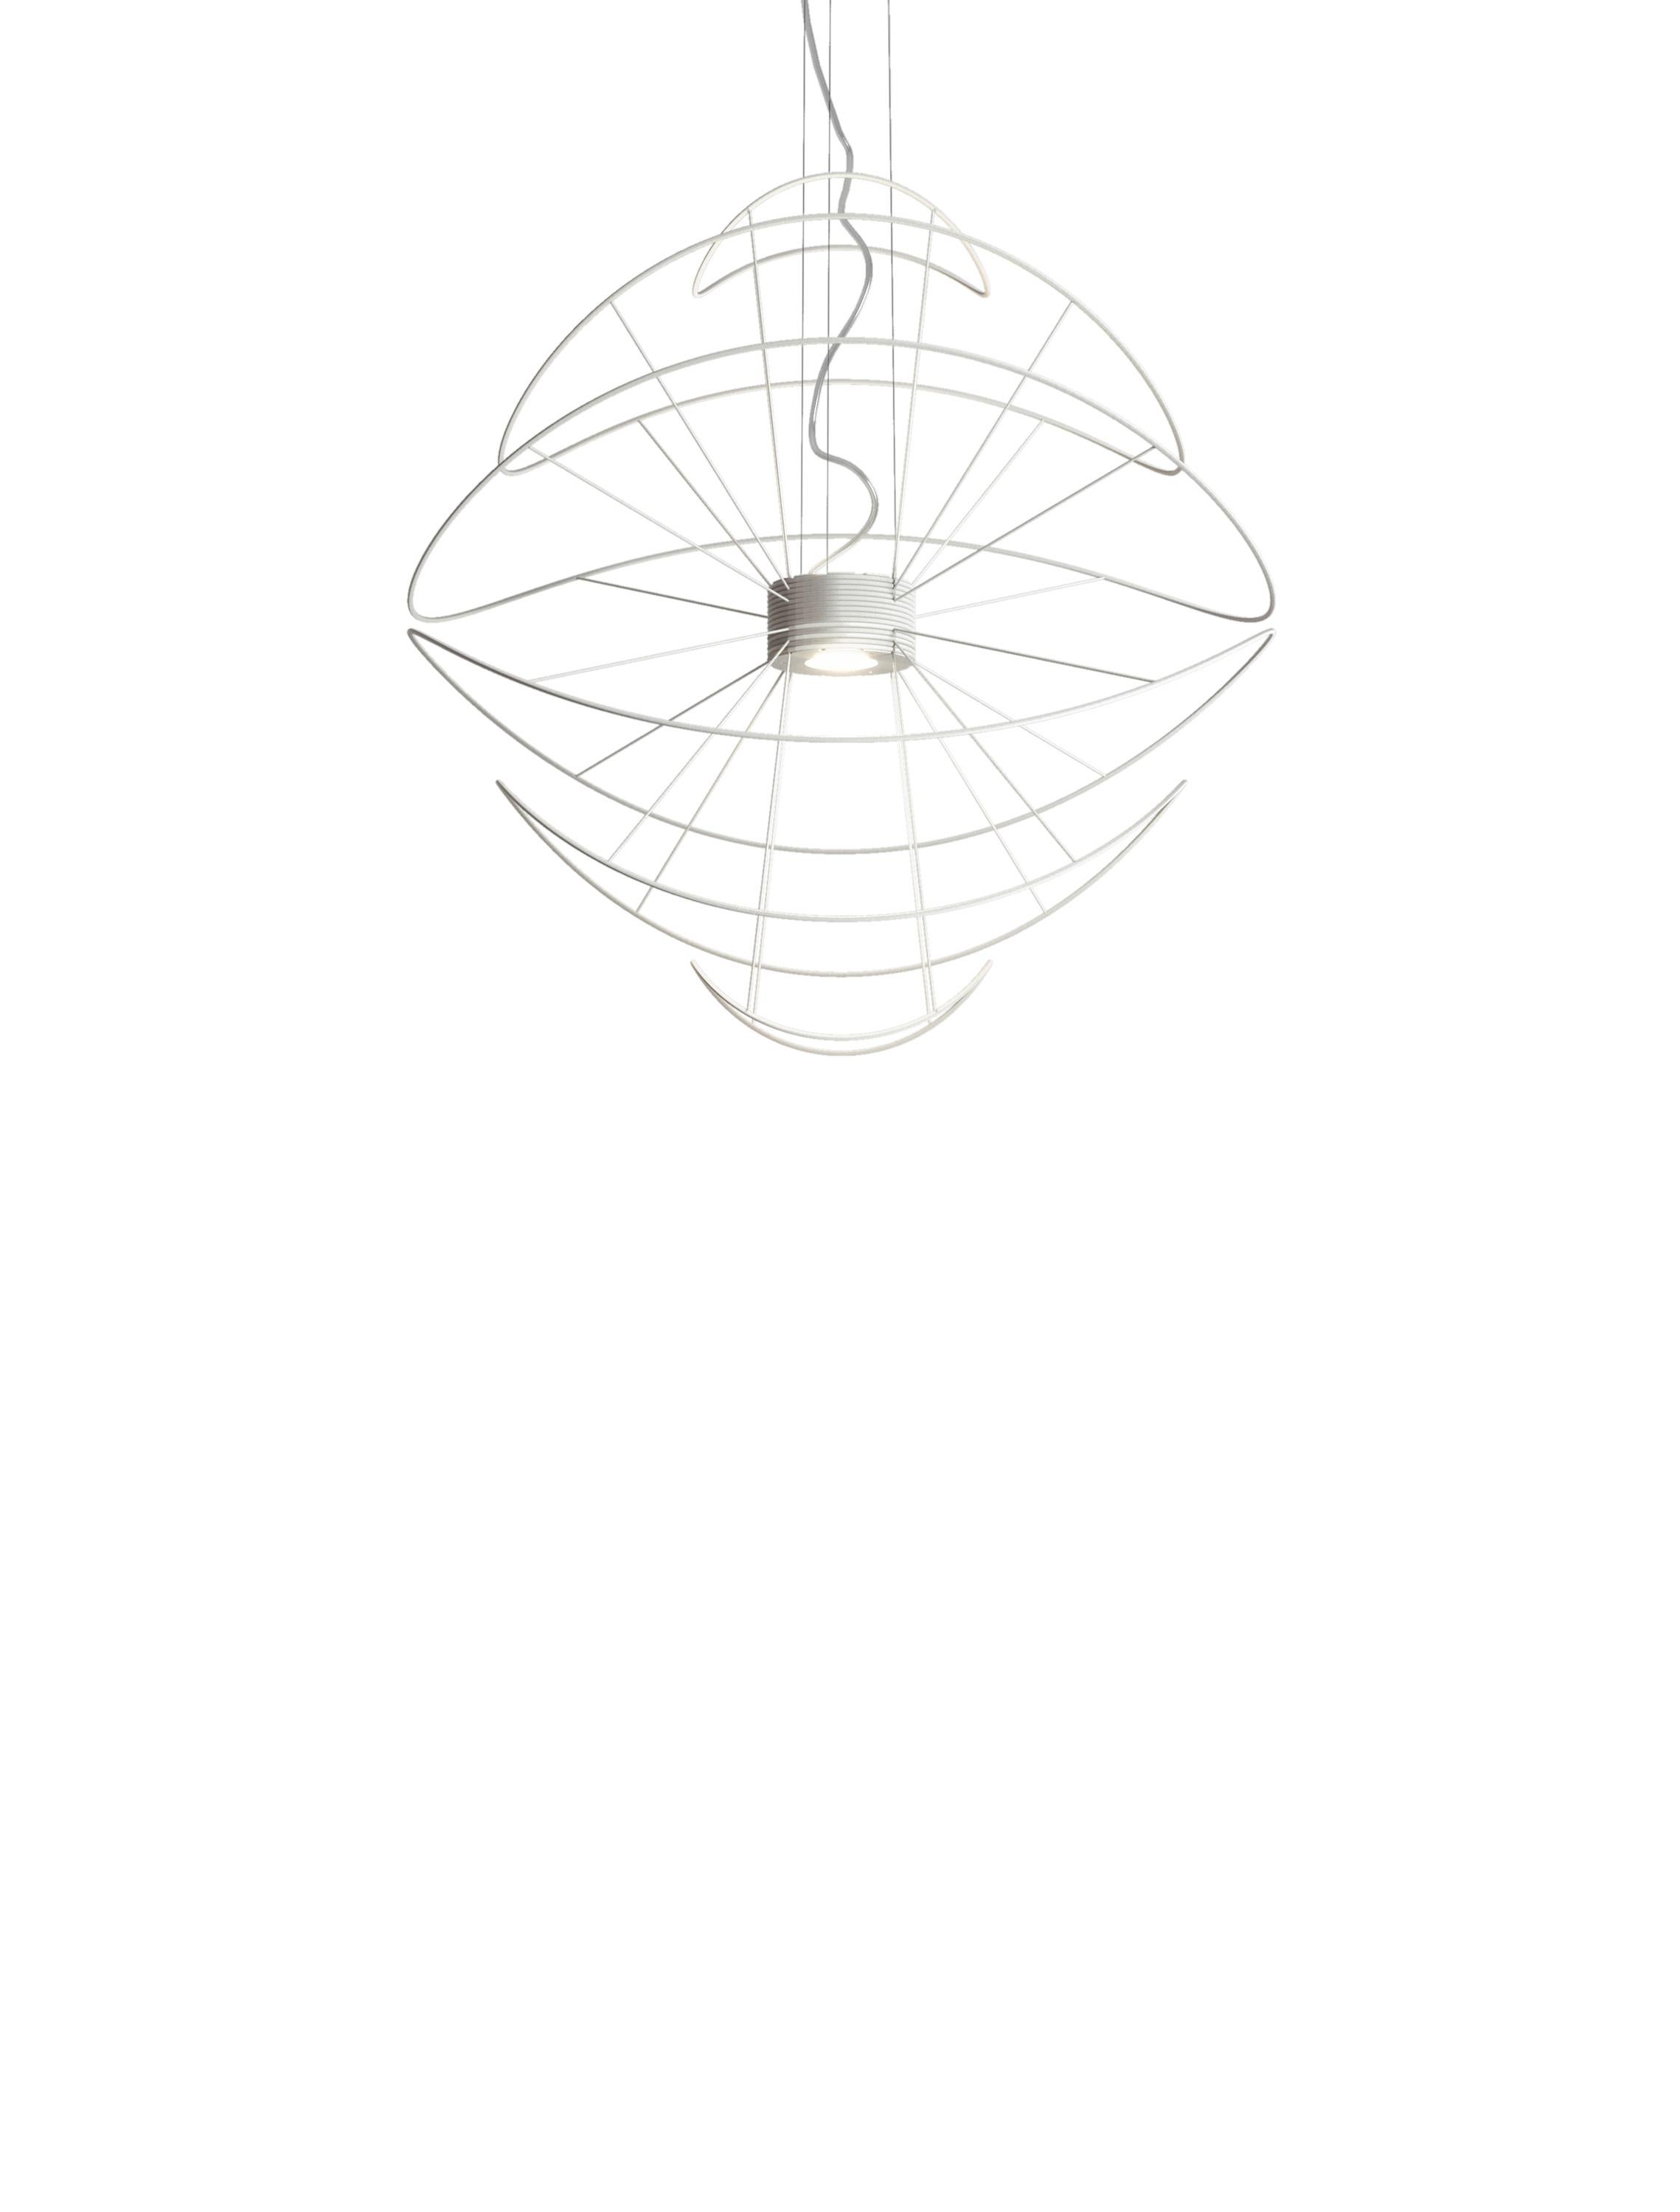 Axolight Hoops 6 Large Pendant Lamp in White by Giovanni Barbato

Lines that dance voluptuously around a nucleus in a changing game of reflected shapes and light. The sinuosity of Hoops is a thin twirling thread, to be followed by the eyes.

Grace,